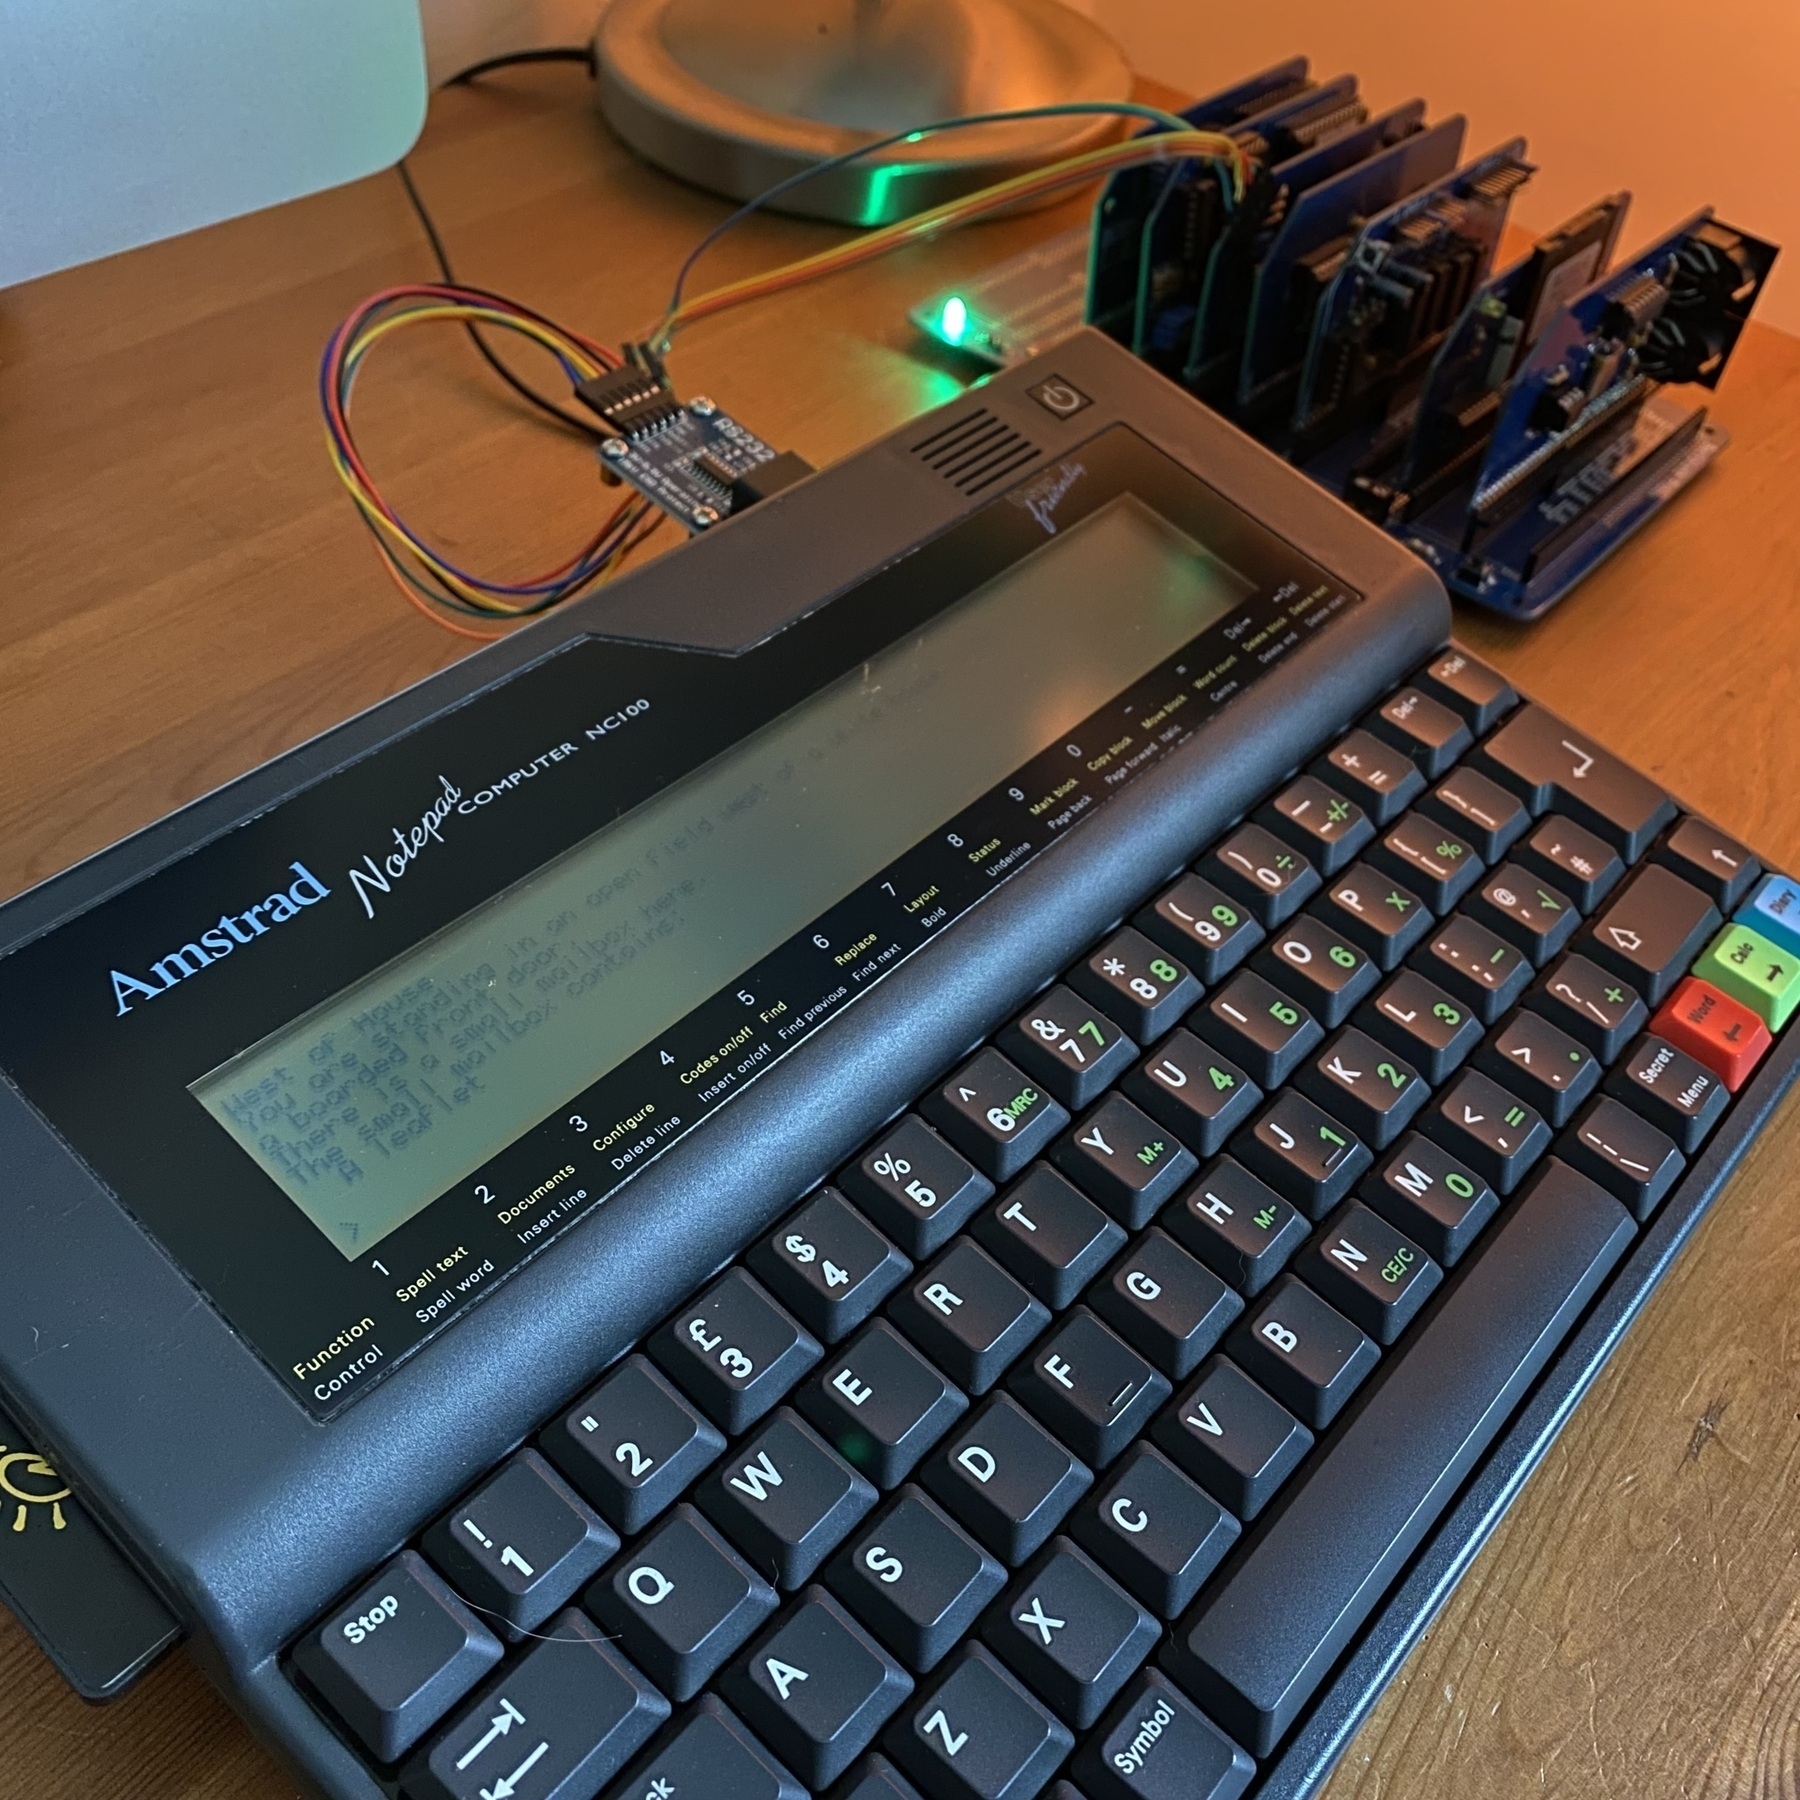 Amstrad NC100 connected to RC2014 via RS232